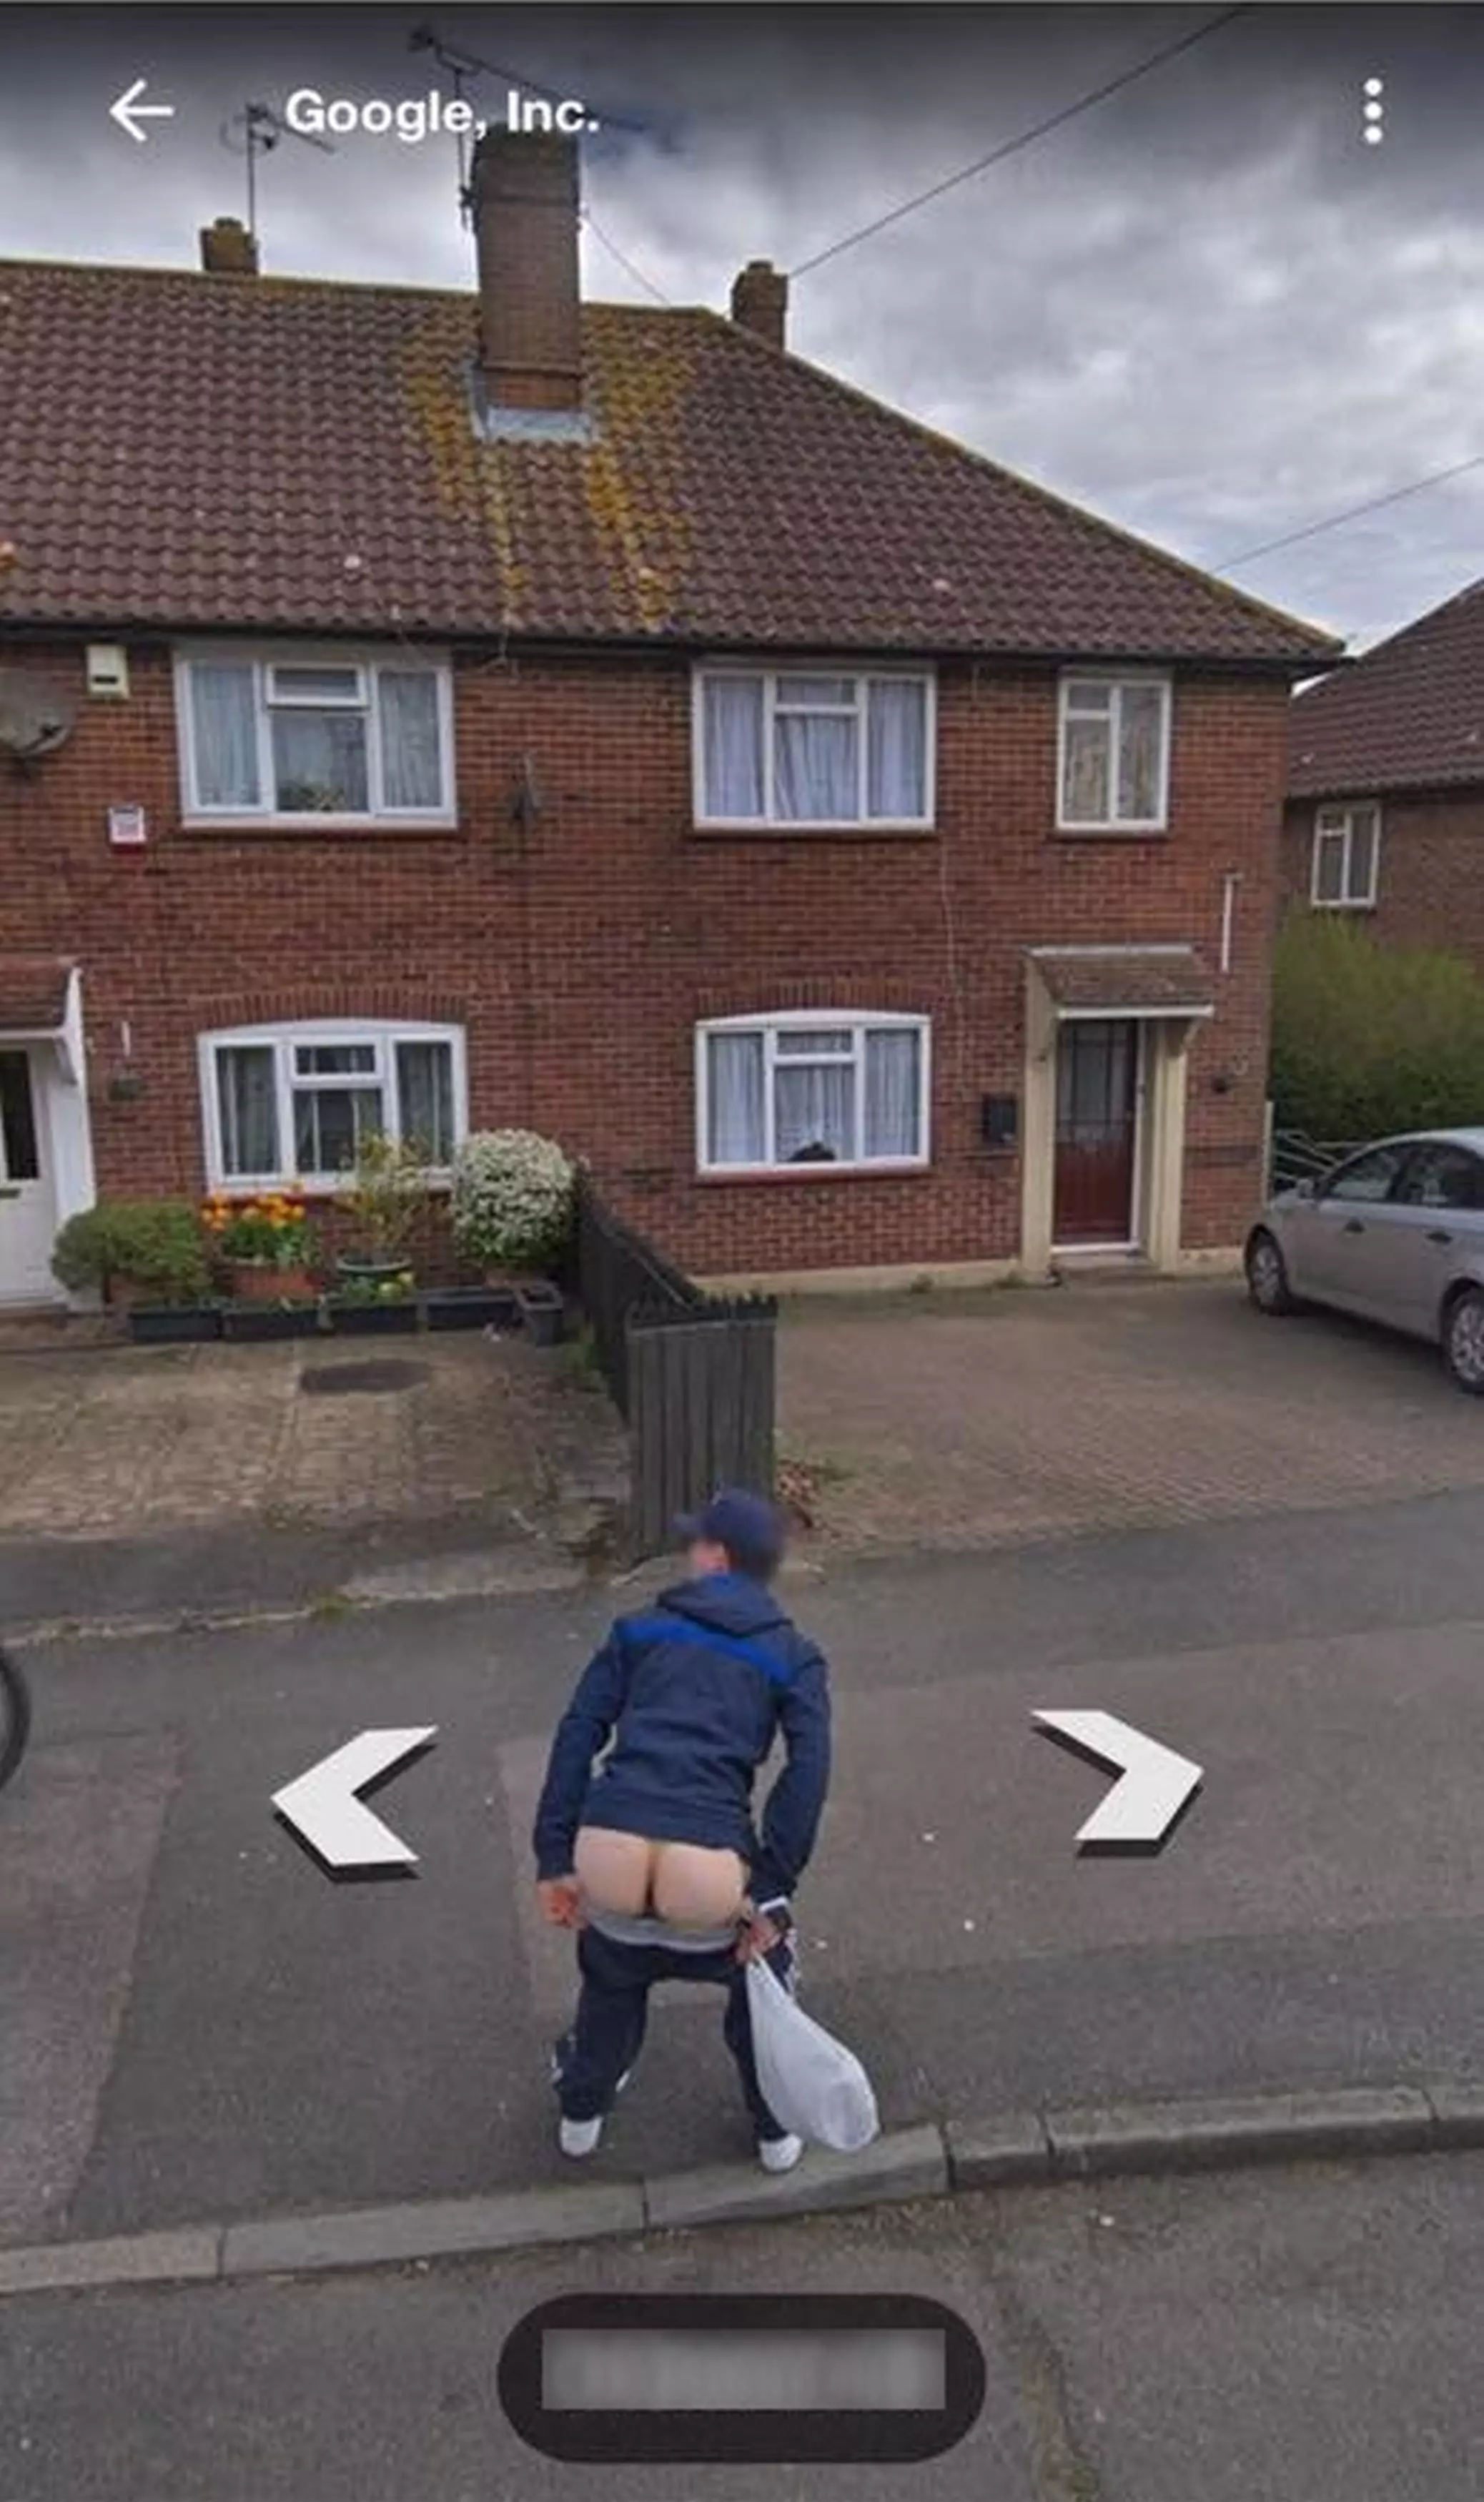 Toby Sullivan spotted the Google Street View car and pulled his kecks down.